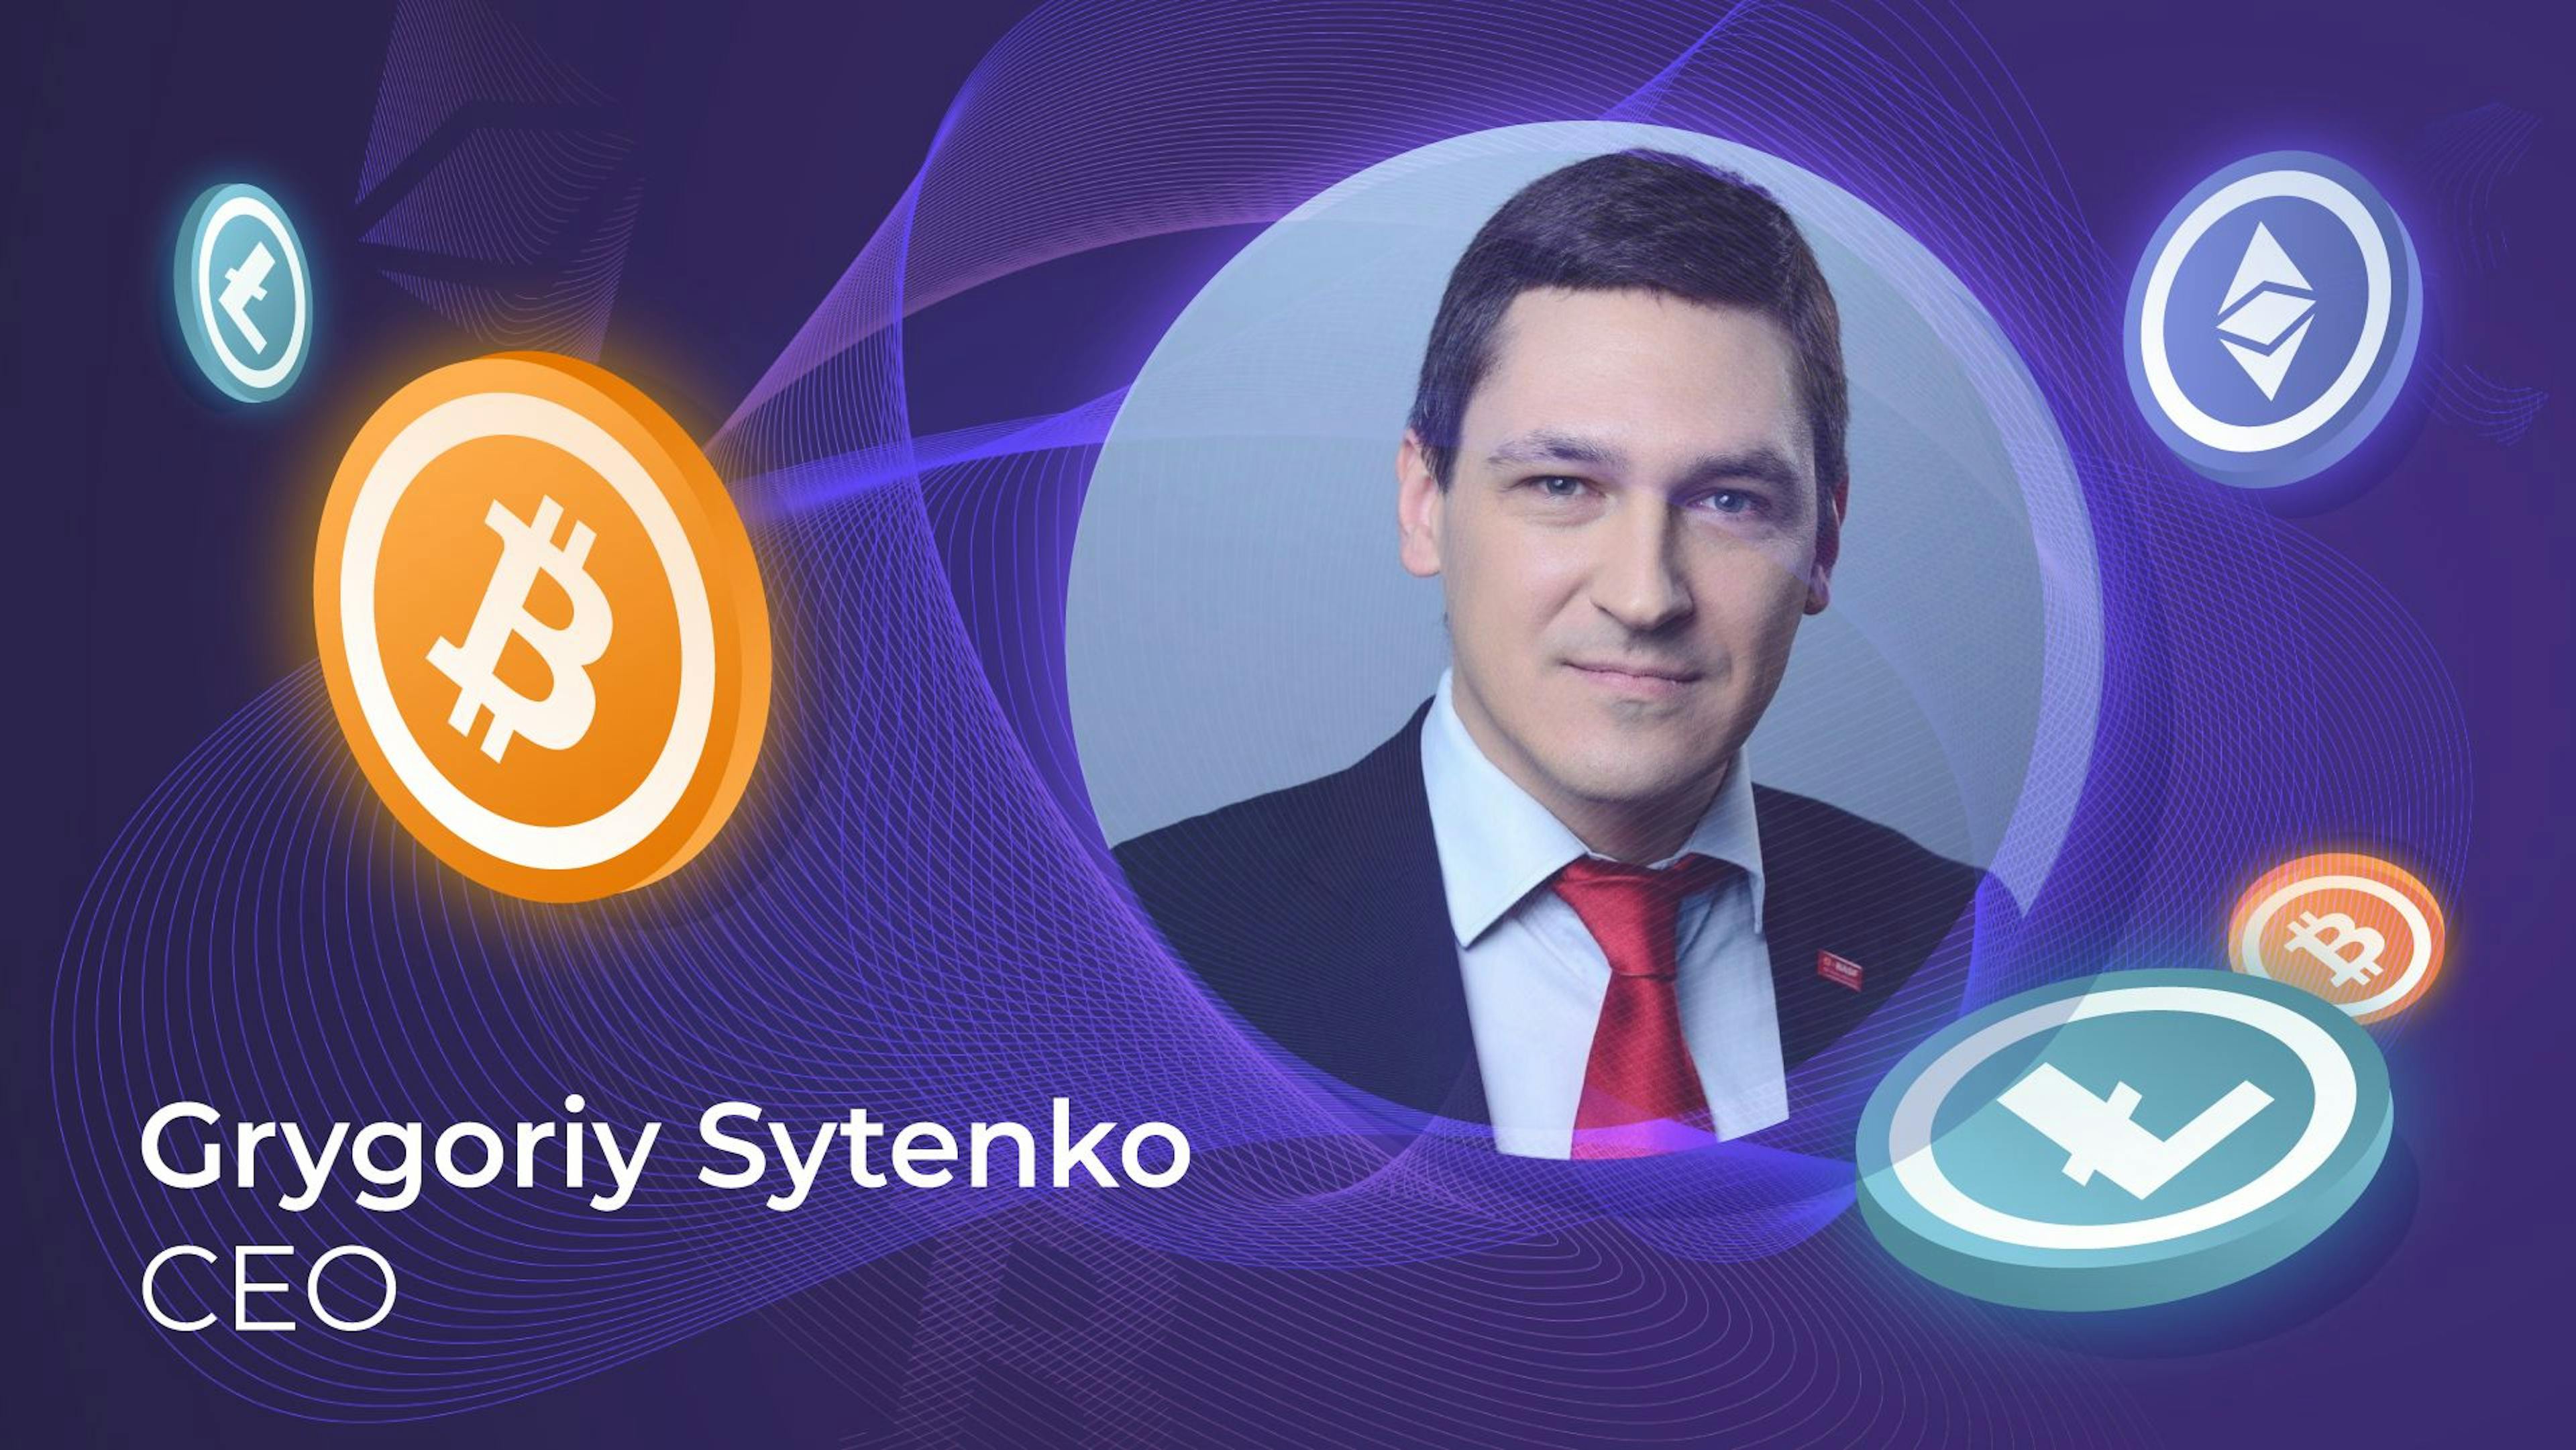 featured image - "Technology is much more advanced than that of 10-year-old blockchains," says Mr. Grygoriy Sytenko